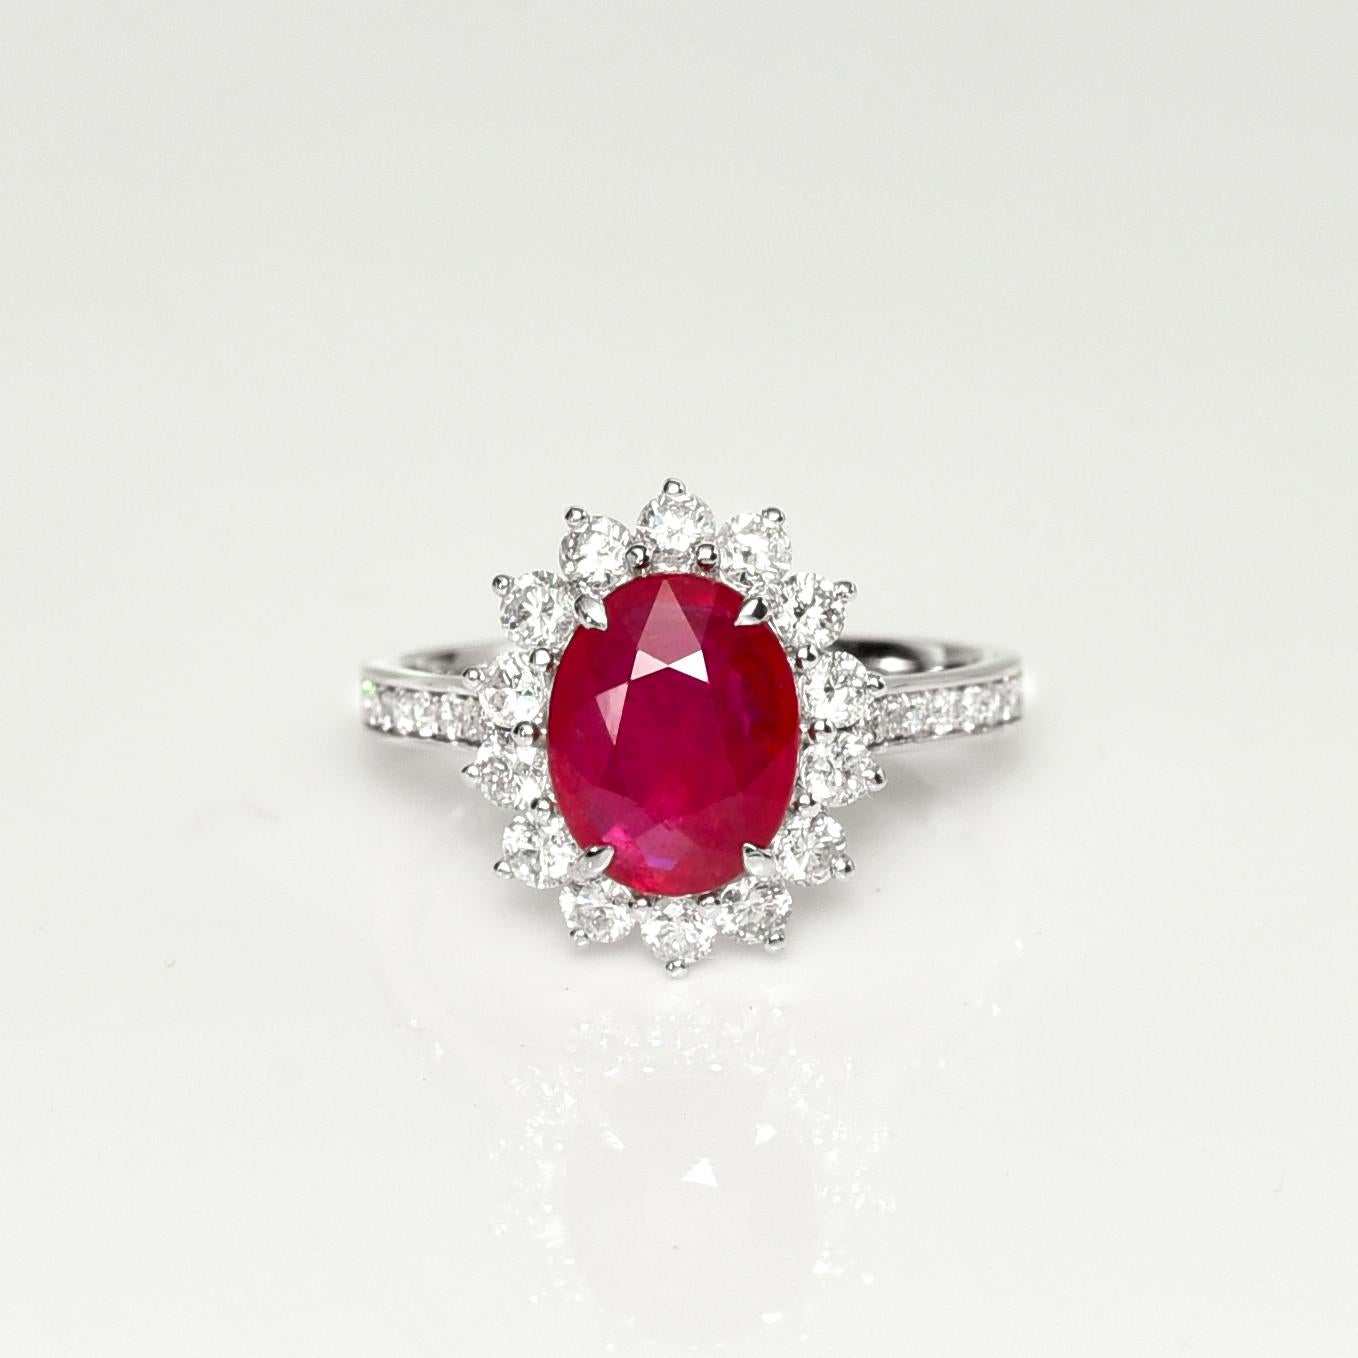 **GRS 18K 2.11 Ct Red Ruby& Diamonds Antique Art Deco Style Engagement Ring**
One natural red ruby as the center stone weighing 2.11 ct surrounded by the FG VS accent diamonds weighing 0.74 ct on the 18K white gold Dianna design band to make the